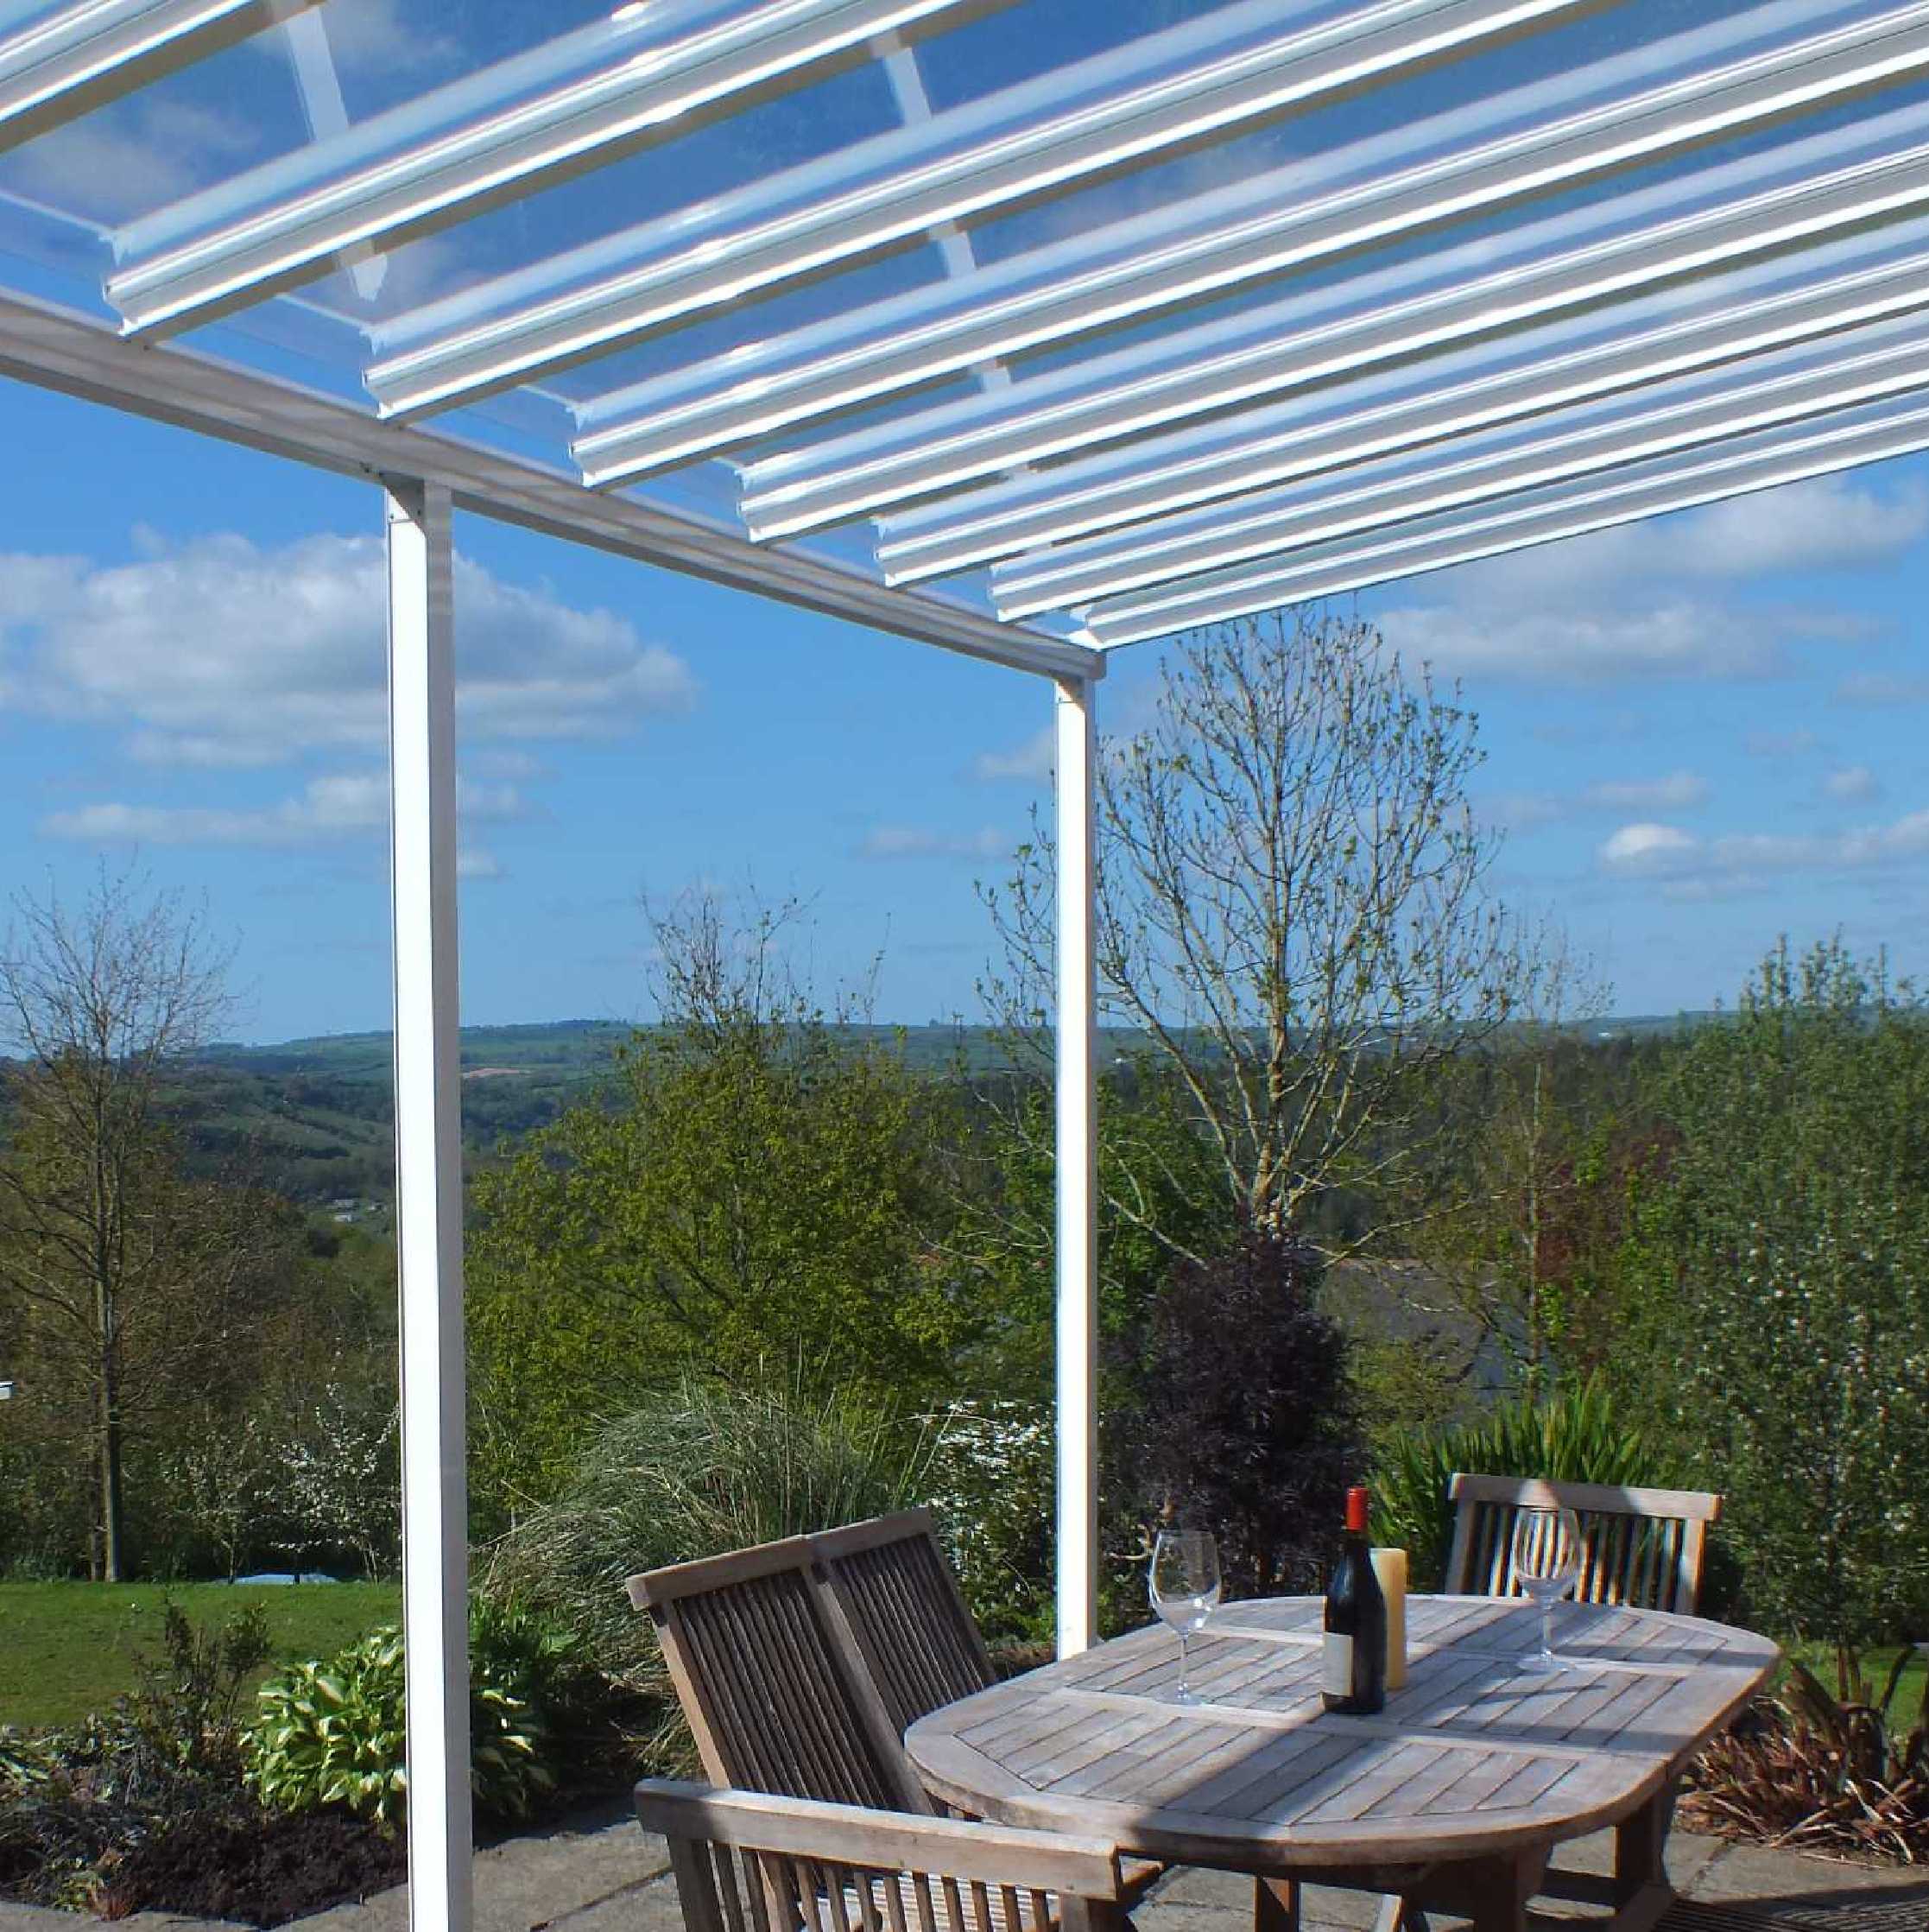 Buy Omega Smart Lean-To Canopy, White UNGLAZED for 6mm Glazing - 7.7m (W) x 2.5m (P), (4) Supporting Posts online today